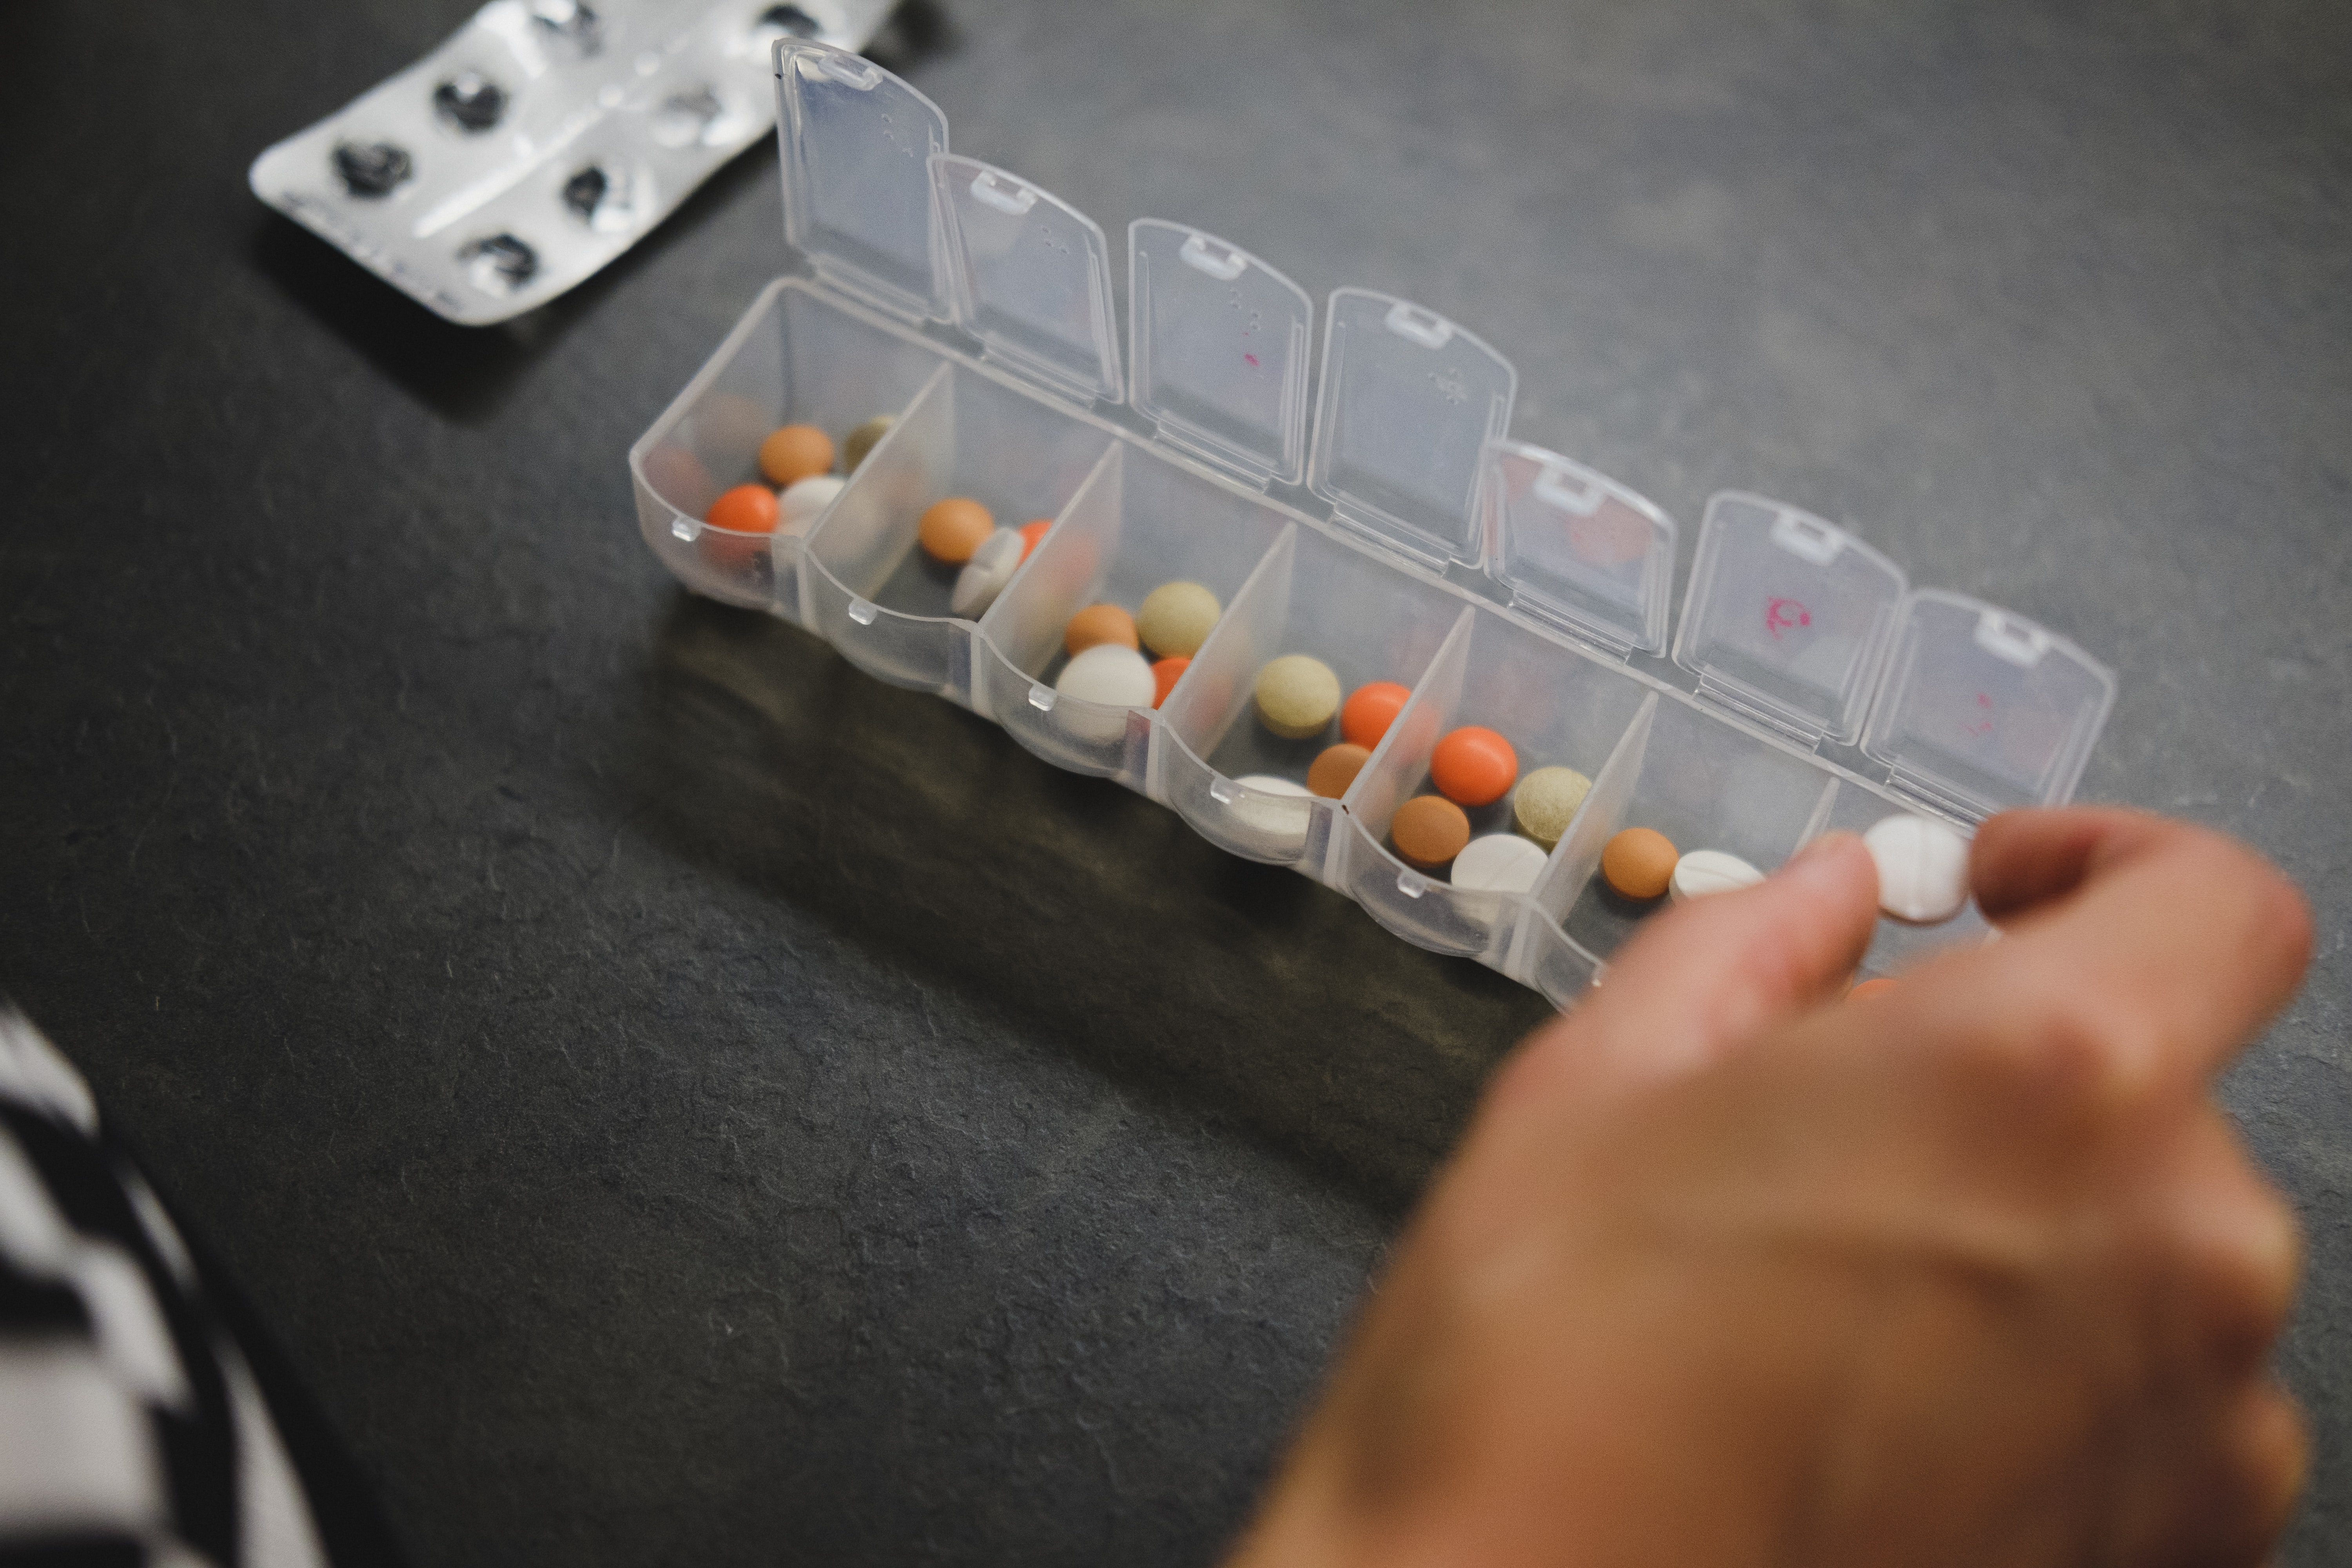 Using pill boxes is an organisational strategy that may help patients remember to take their medications. Image: Laurynas Mereckas / Unsplash